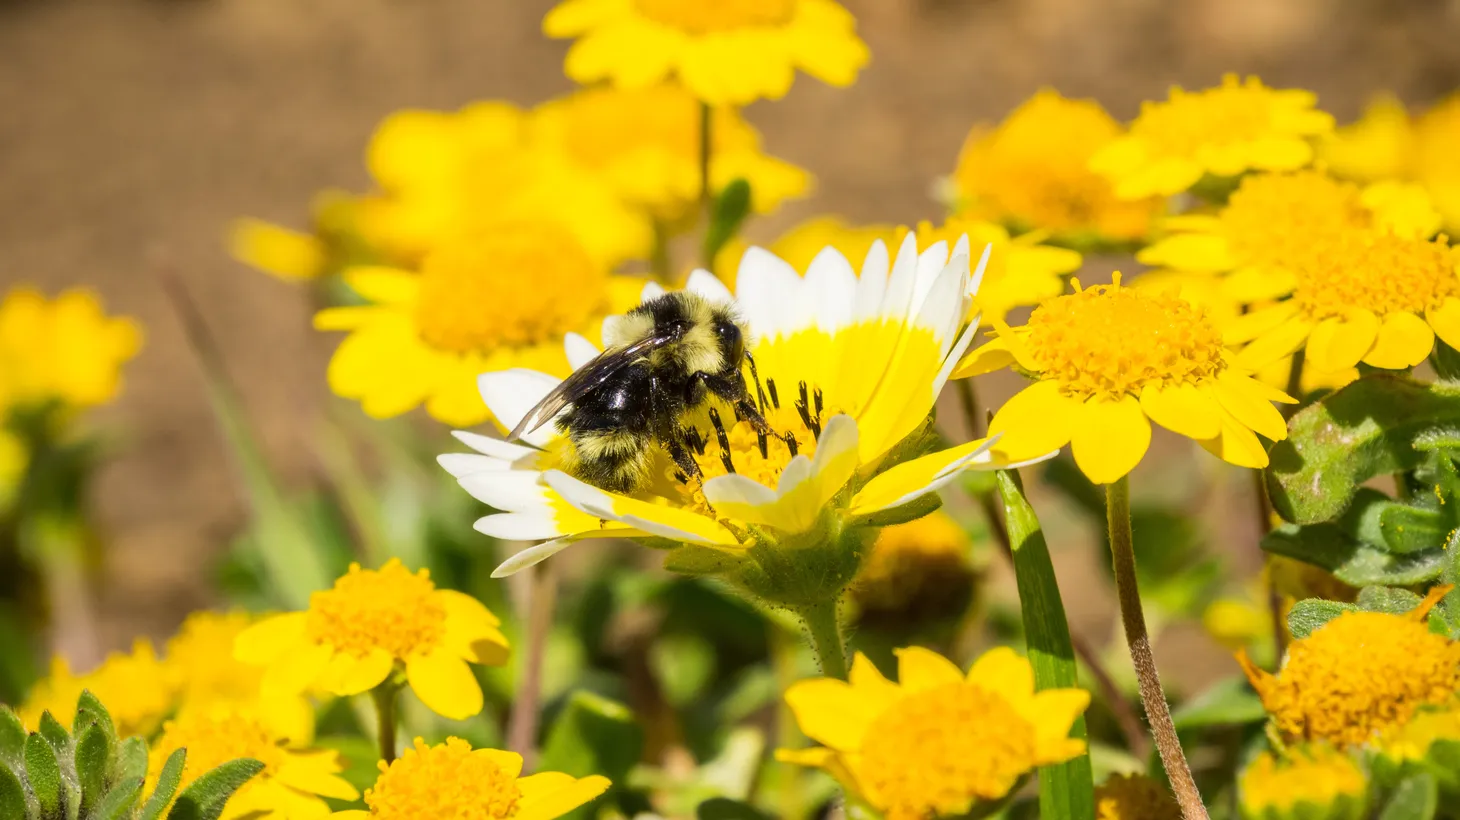 “Here in California, [honeybees] are not part of our native biodiversity. And all of those other bees are also really critical parts of the ecosystem. … A lot of pollination services from these solitary bees … [are] coming into farms and pollinating crops. So they’re really critical for plant reproduction and also our food supply,” says UC Irvine researcher Tobin J. Hammer.